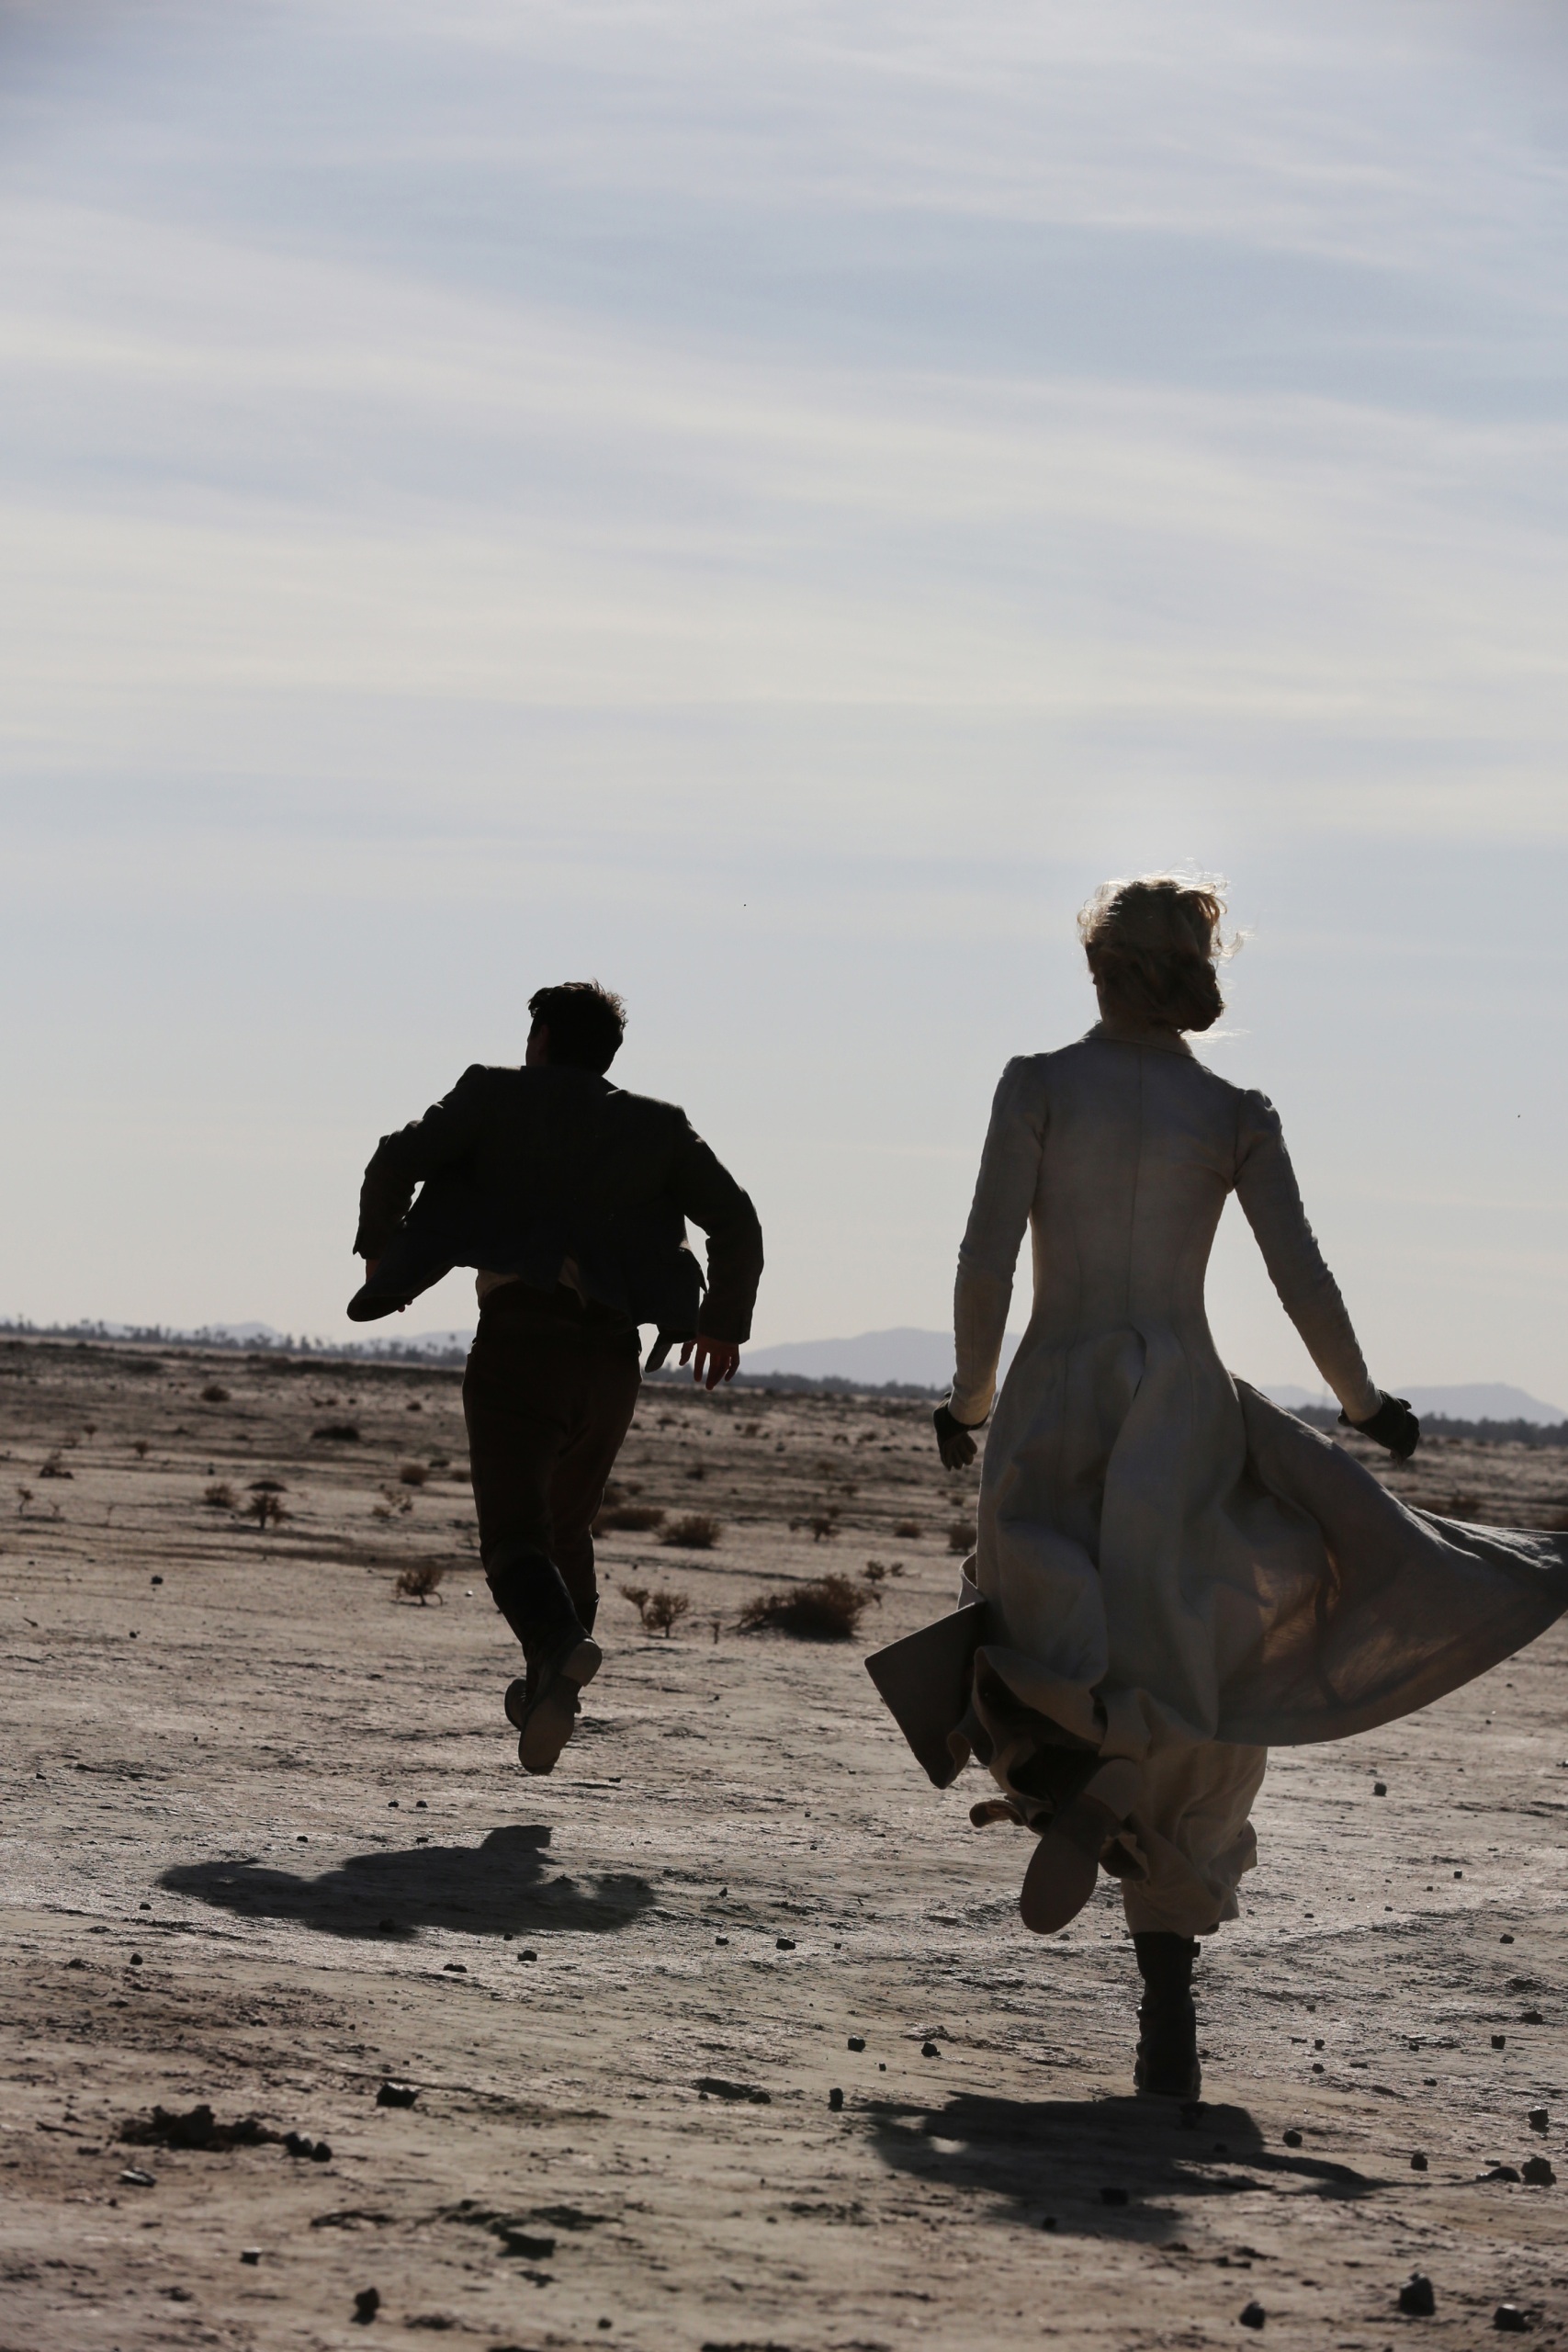 A man in a suit and a woman in a long dress run through the desert, away from the camera. The sun shines intensely and you can only make out the outlines of the people. 